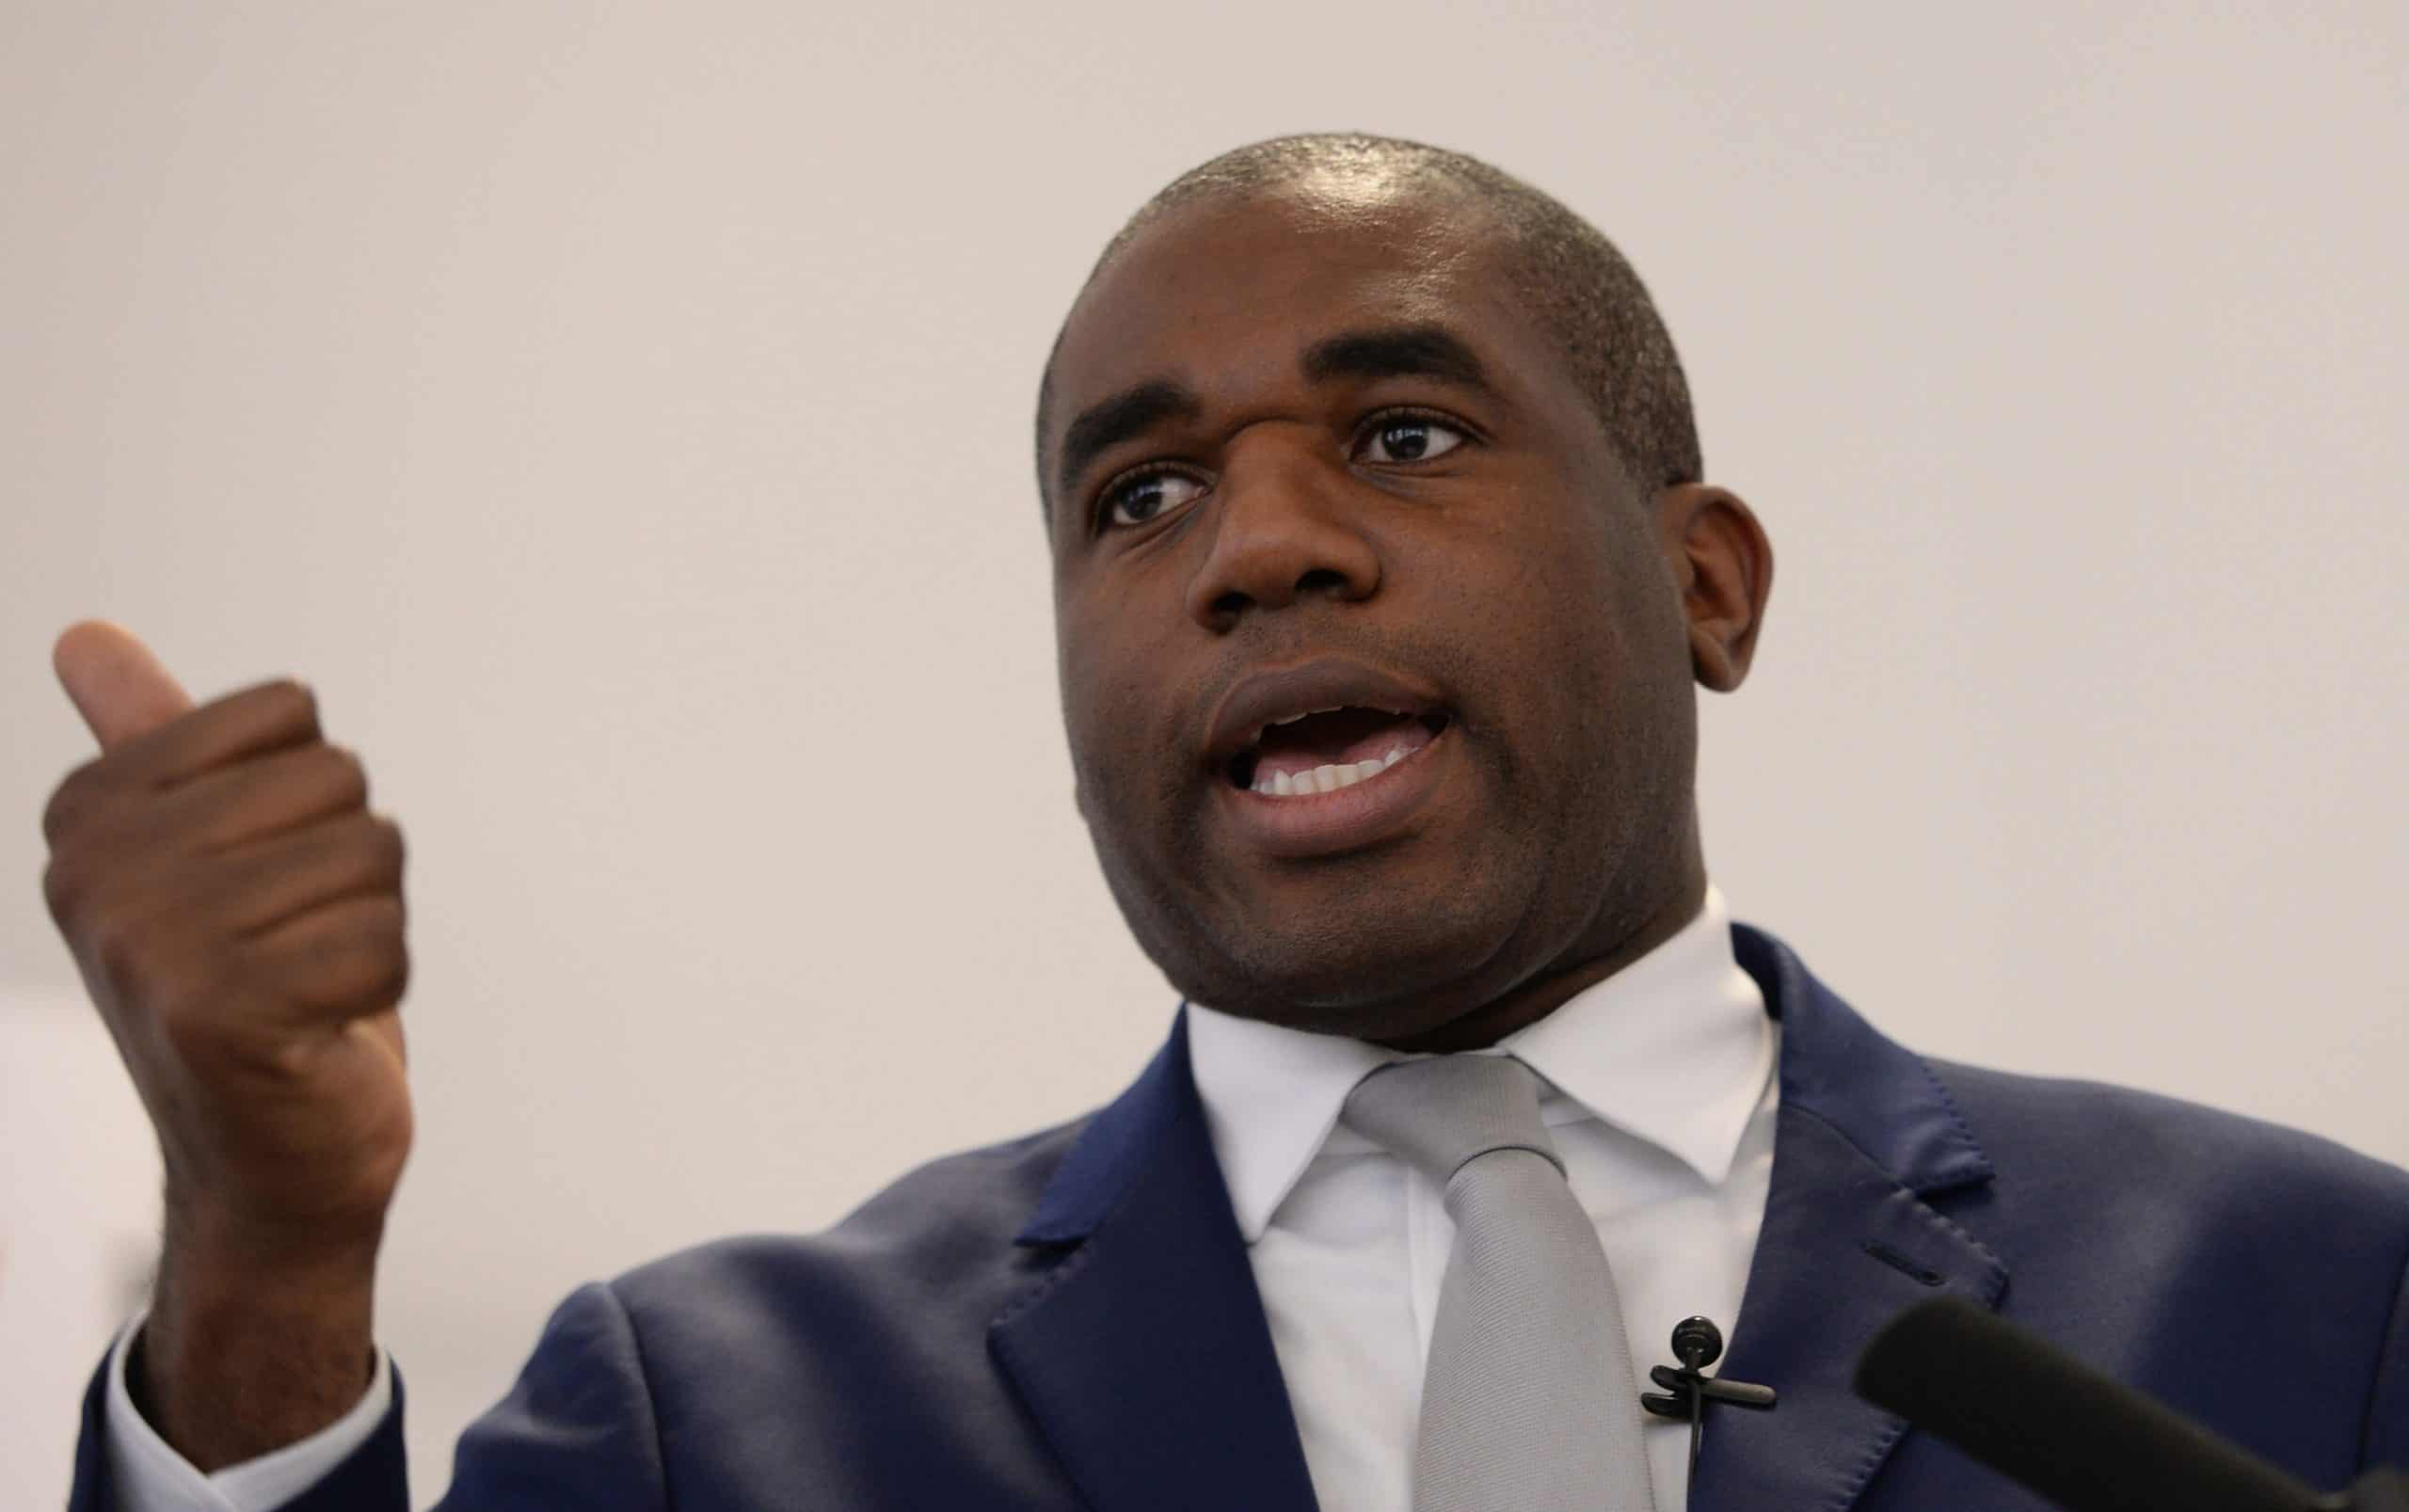 Lammy: Tories are ‘the party of lawlessness and disorder’ after Brexit vote